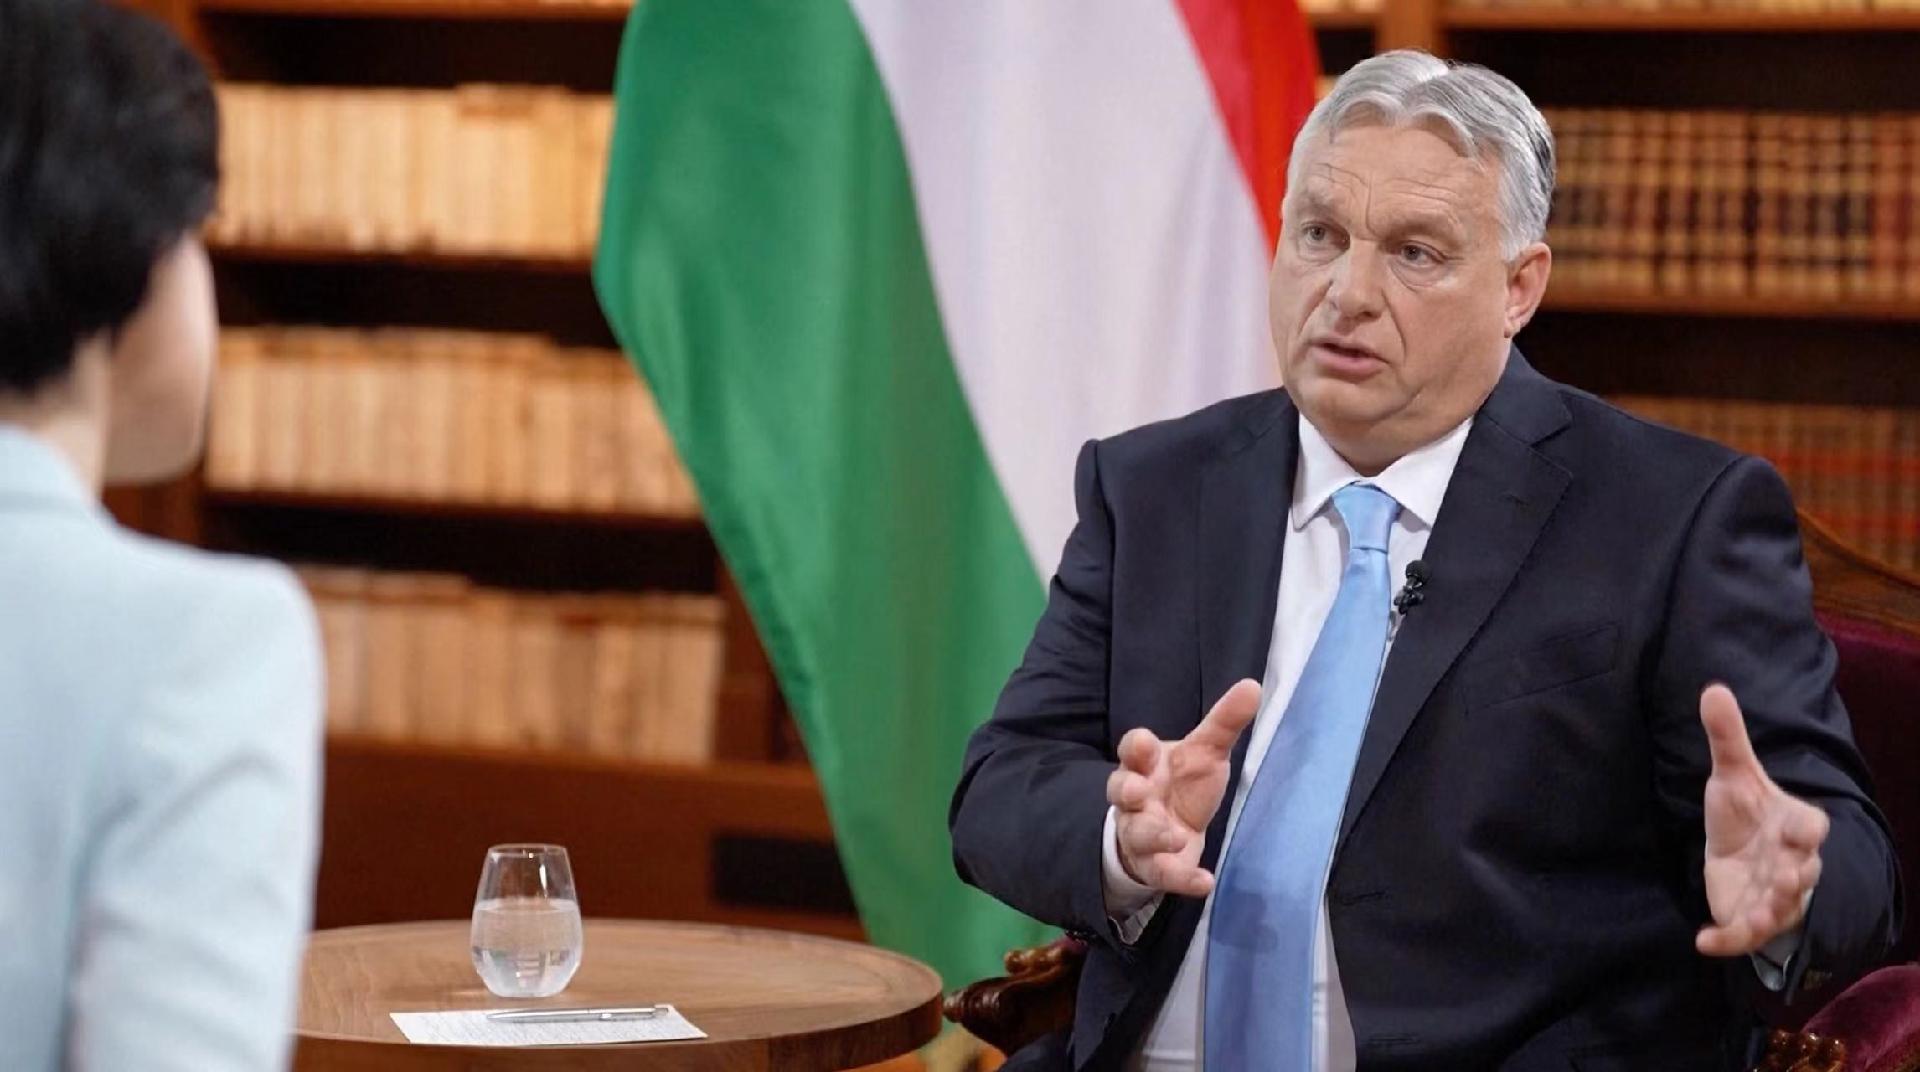 Xi’s visit to Europe at right time, necessary: Hungarian PM [Video]